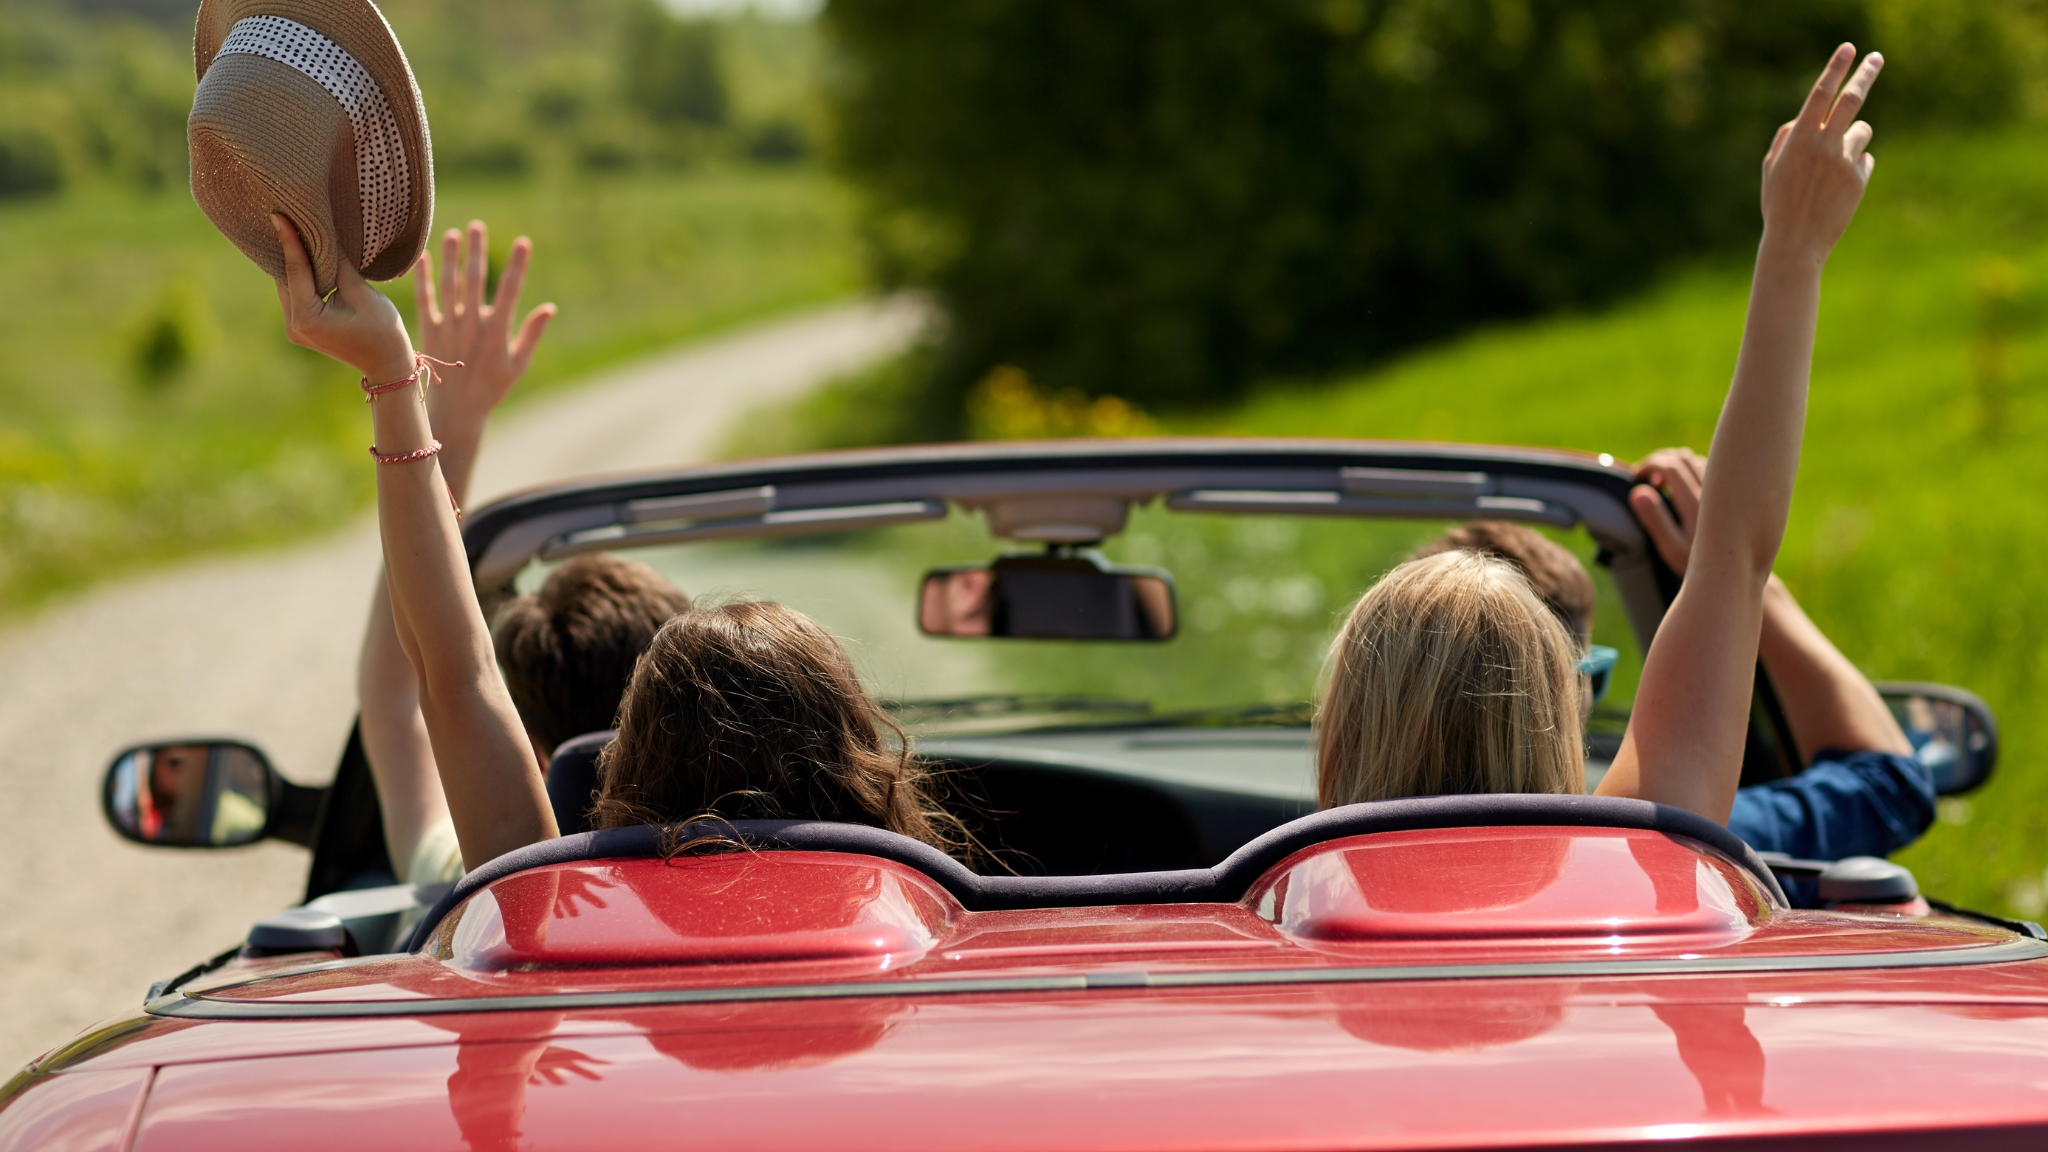 People-in-car-driving-away-with-hands-up